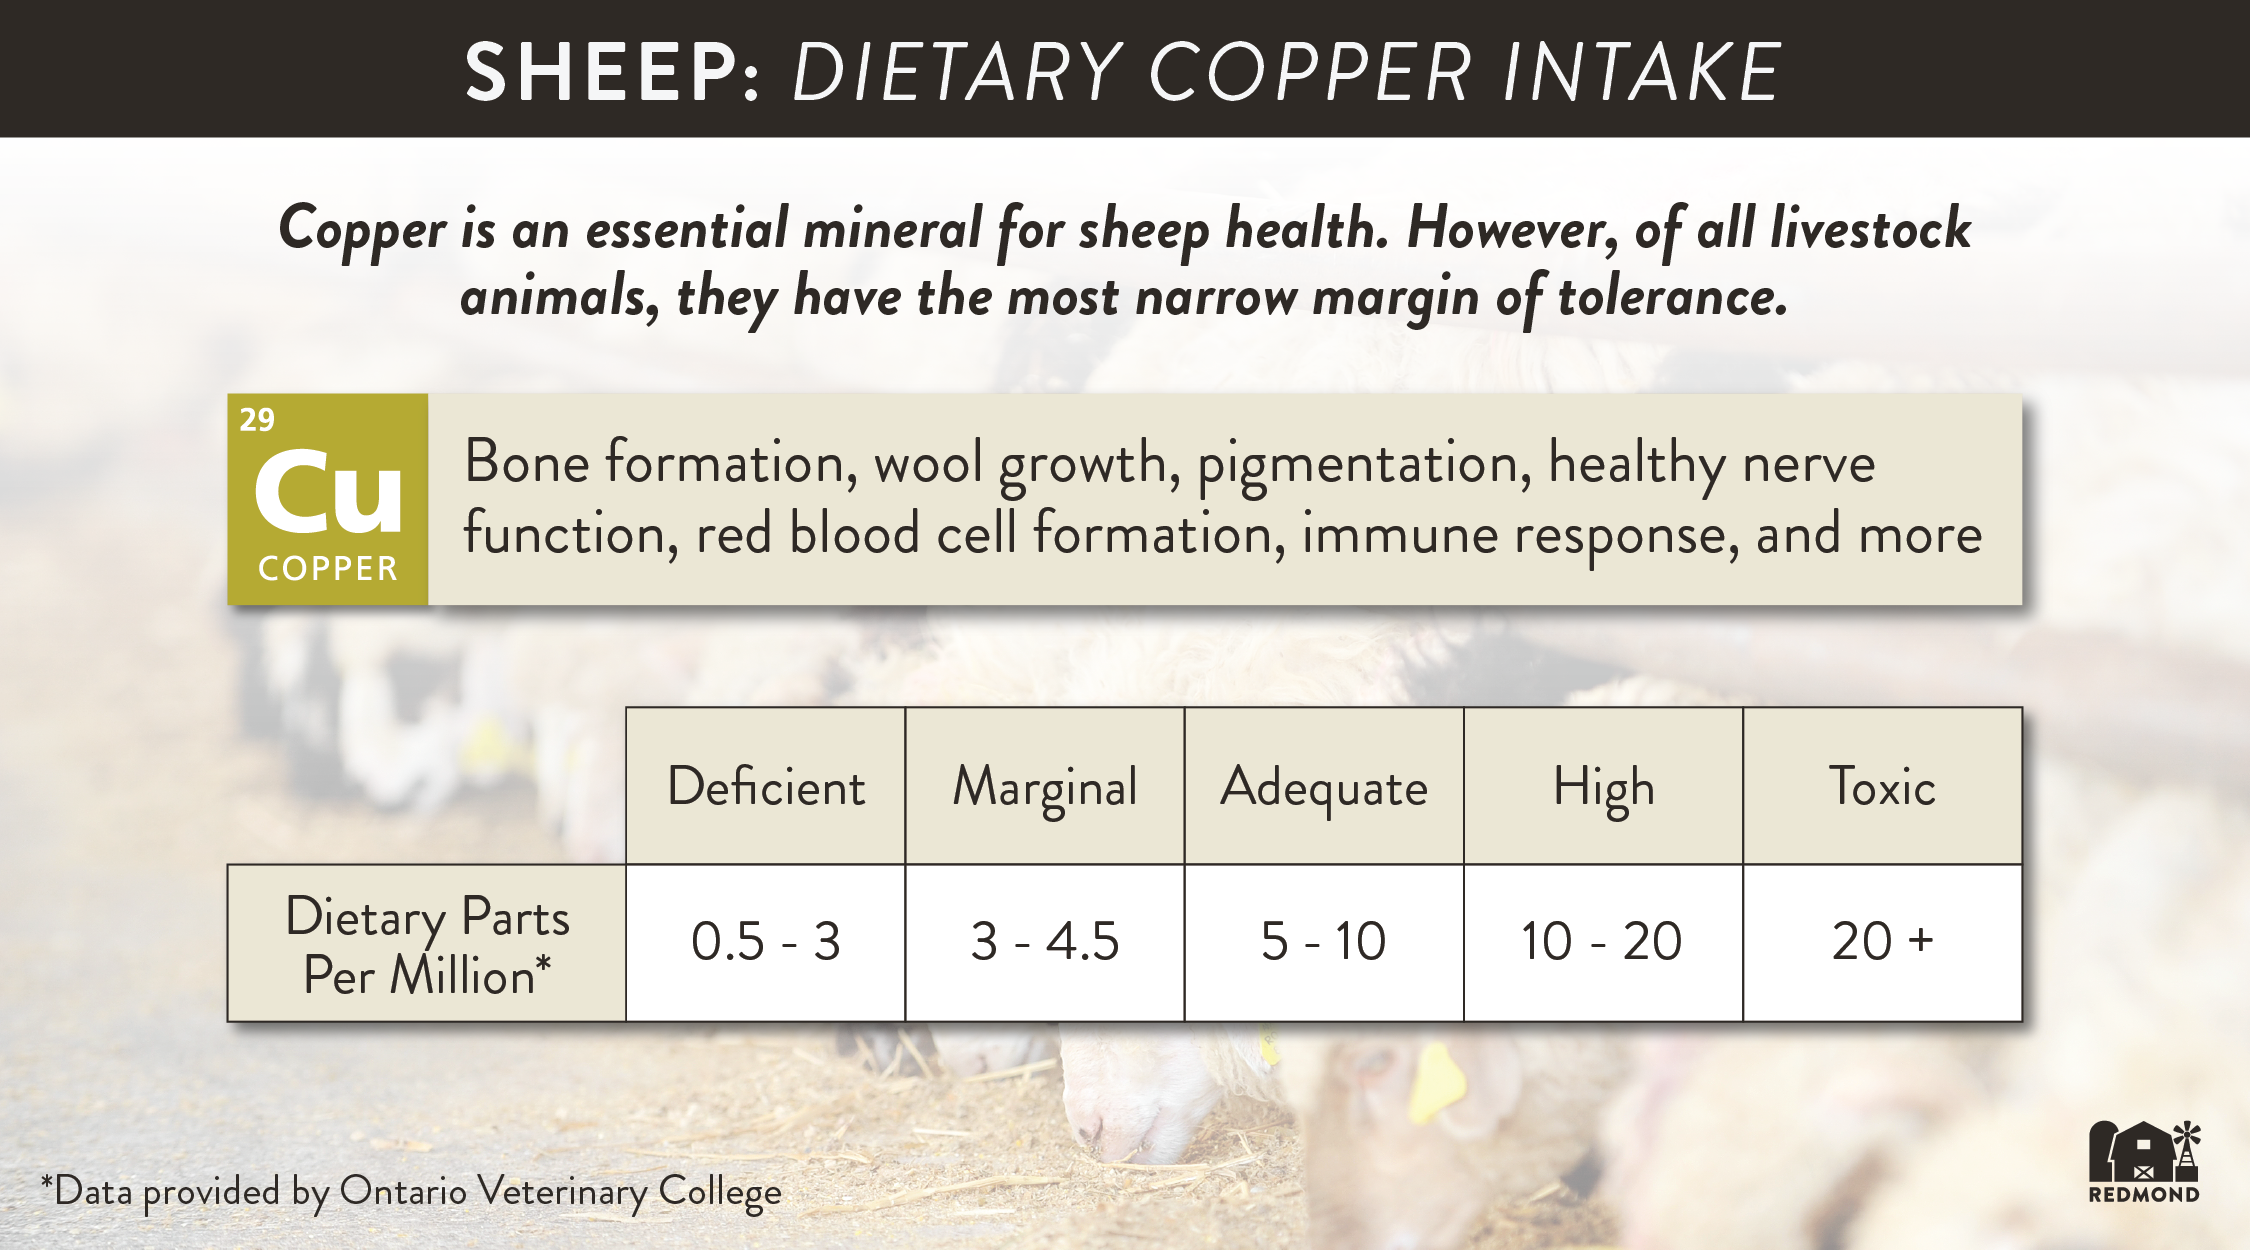 Dietary copper intake for sheep